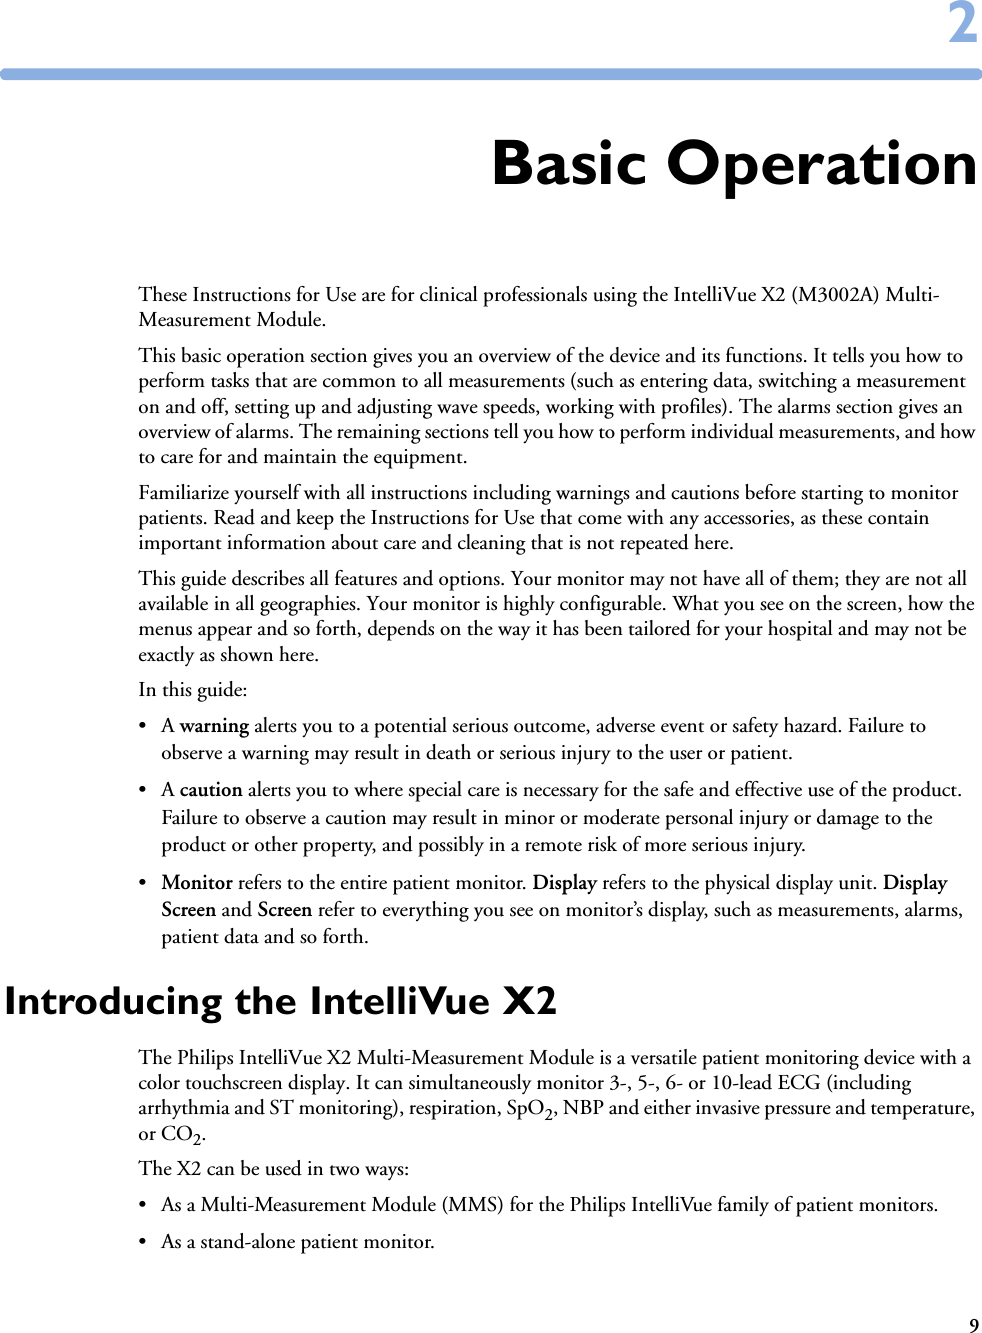 922Basic OperationThese Instructions for Use are for clinical professionals using the IntelliVue X2 (M3002A) Multi-Measurement Module.This basic operation section gives you an overview of the device and its functions. It tells you how to perform tasks that are common to all measurements (such as entering data, switching a measurement on and off, setting up and adjusting wave speeds, working with profiles). The alarms section gives an overview of alarms. The remaining sections tell you how to perform individual measurements, and how to care for and maintain the equipment.Familiarize yourself with all instructions including warnings and cautions before starting to monitor patients. Read and keep the Instructions for Use that come with any accessories, as these contain important information about care and cleaning that is not repeated here.This guide describes all features and options. Your monitor may not have all of them; they are not all available in all geographies. Your monitor is highly configurable. What you see on the screen, how the menus appear and so forth, depends on the way it has been tailored for your hospital and may not be exactly as shown here.In this guide:•A warning alerts you to a potential serious outcome, adverse event or safety hazard. Failure to observe a warning may result in death or serious injury to the user or patient.•A caution alerts you to where special care is necessary for the safe and effective use of the product. Failure to observe a caution may result in minor or moderate personal injury or damage to the product or other property, and possibly in a remote risk of more serious injury.•Monitor refers to the entire patient monitor. Display refers to the physical display unit. Display Screen and Screen refer to everything you see on monitor’s display, such as measurements, alarms, patient data and so forth.Introducing the IntelliVue X2The Philips IntelliVue X2 Multi-Measurement Module is a versatile patient monitoring device with a color touchscreen display. It can simultaneously monitor 3-, 5-, 6- or 10-lead ECG (including arrhythmia and ST monitoring), respiration, SpO2, NBP and either invasive pressure and temperature, or CO2.The X2 can be used in two ways:• As a Multi-Measurement Module (MMS) for the Philips IntelliVue family of patient monitors.• As a stand-alone patient monitor.